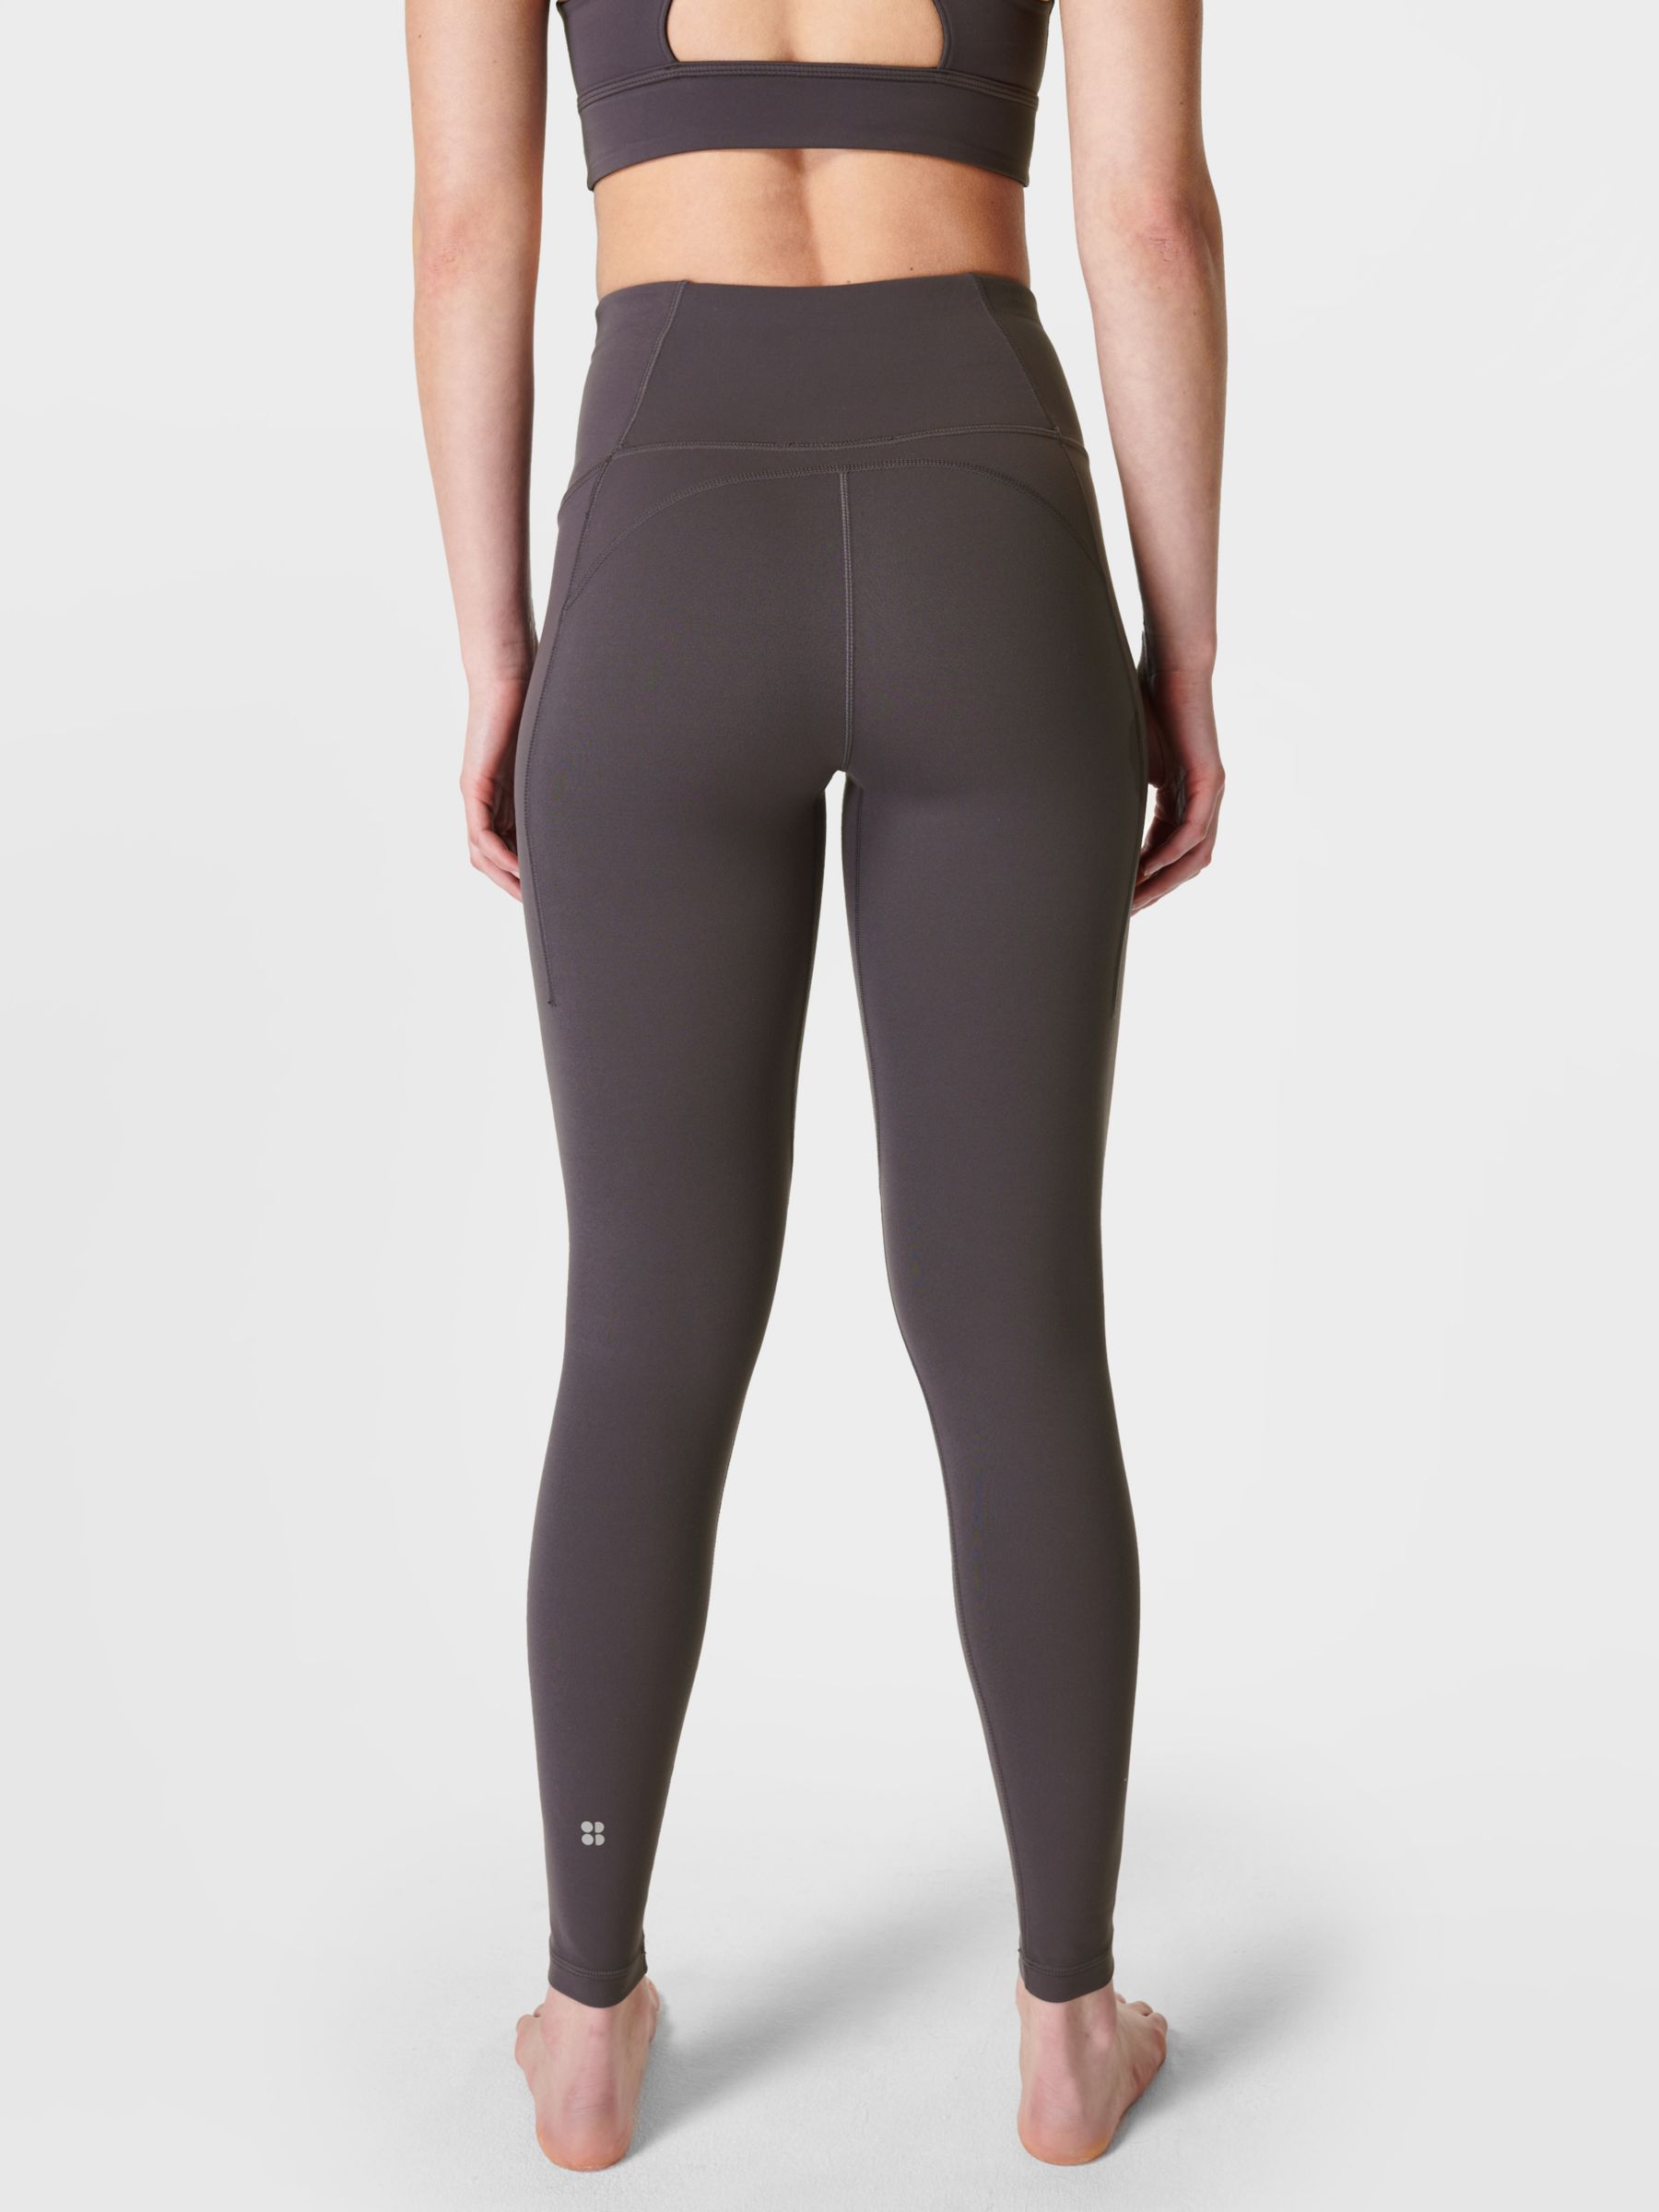 official US shop Black Lululemon Ivivva Leggings with Small Hole